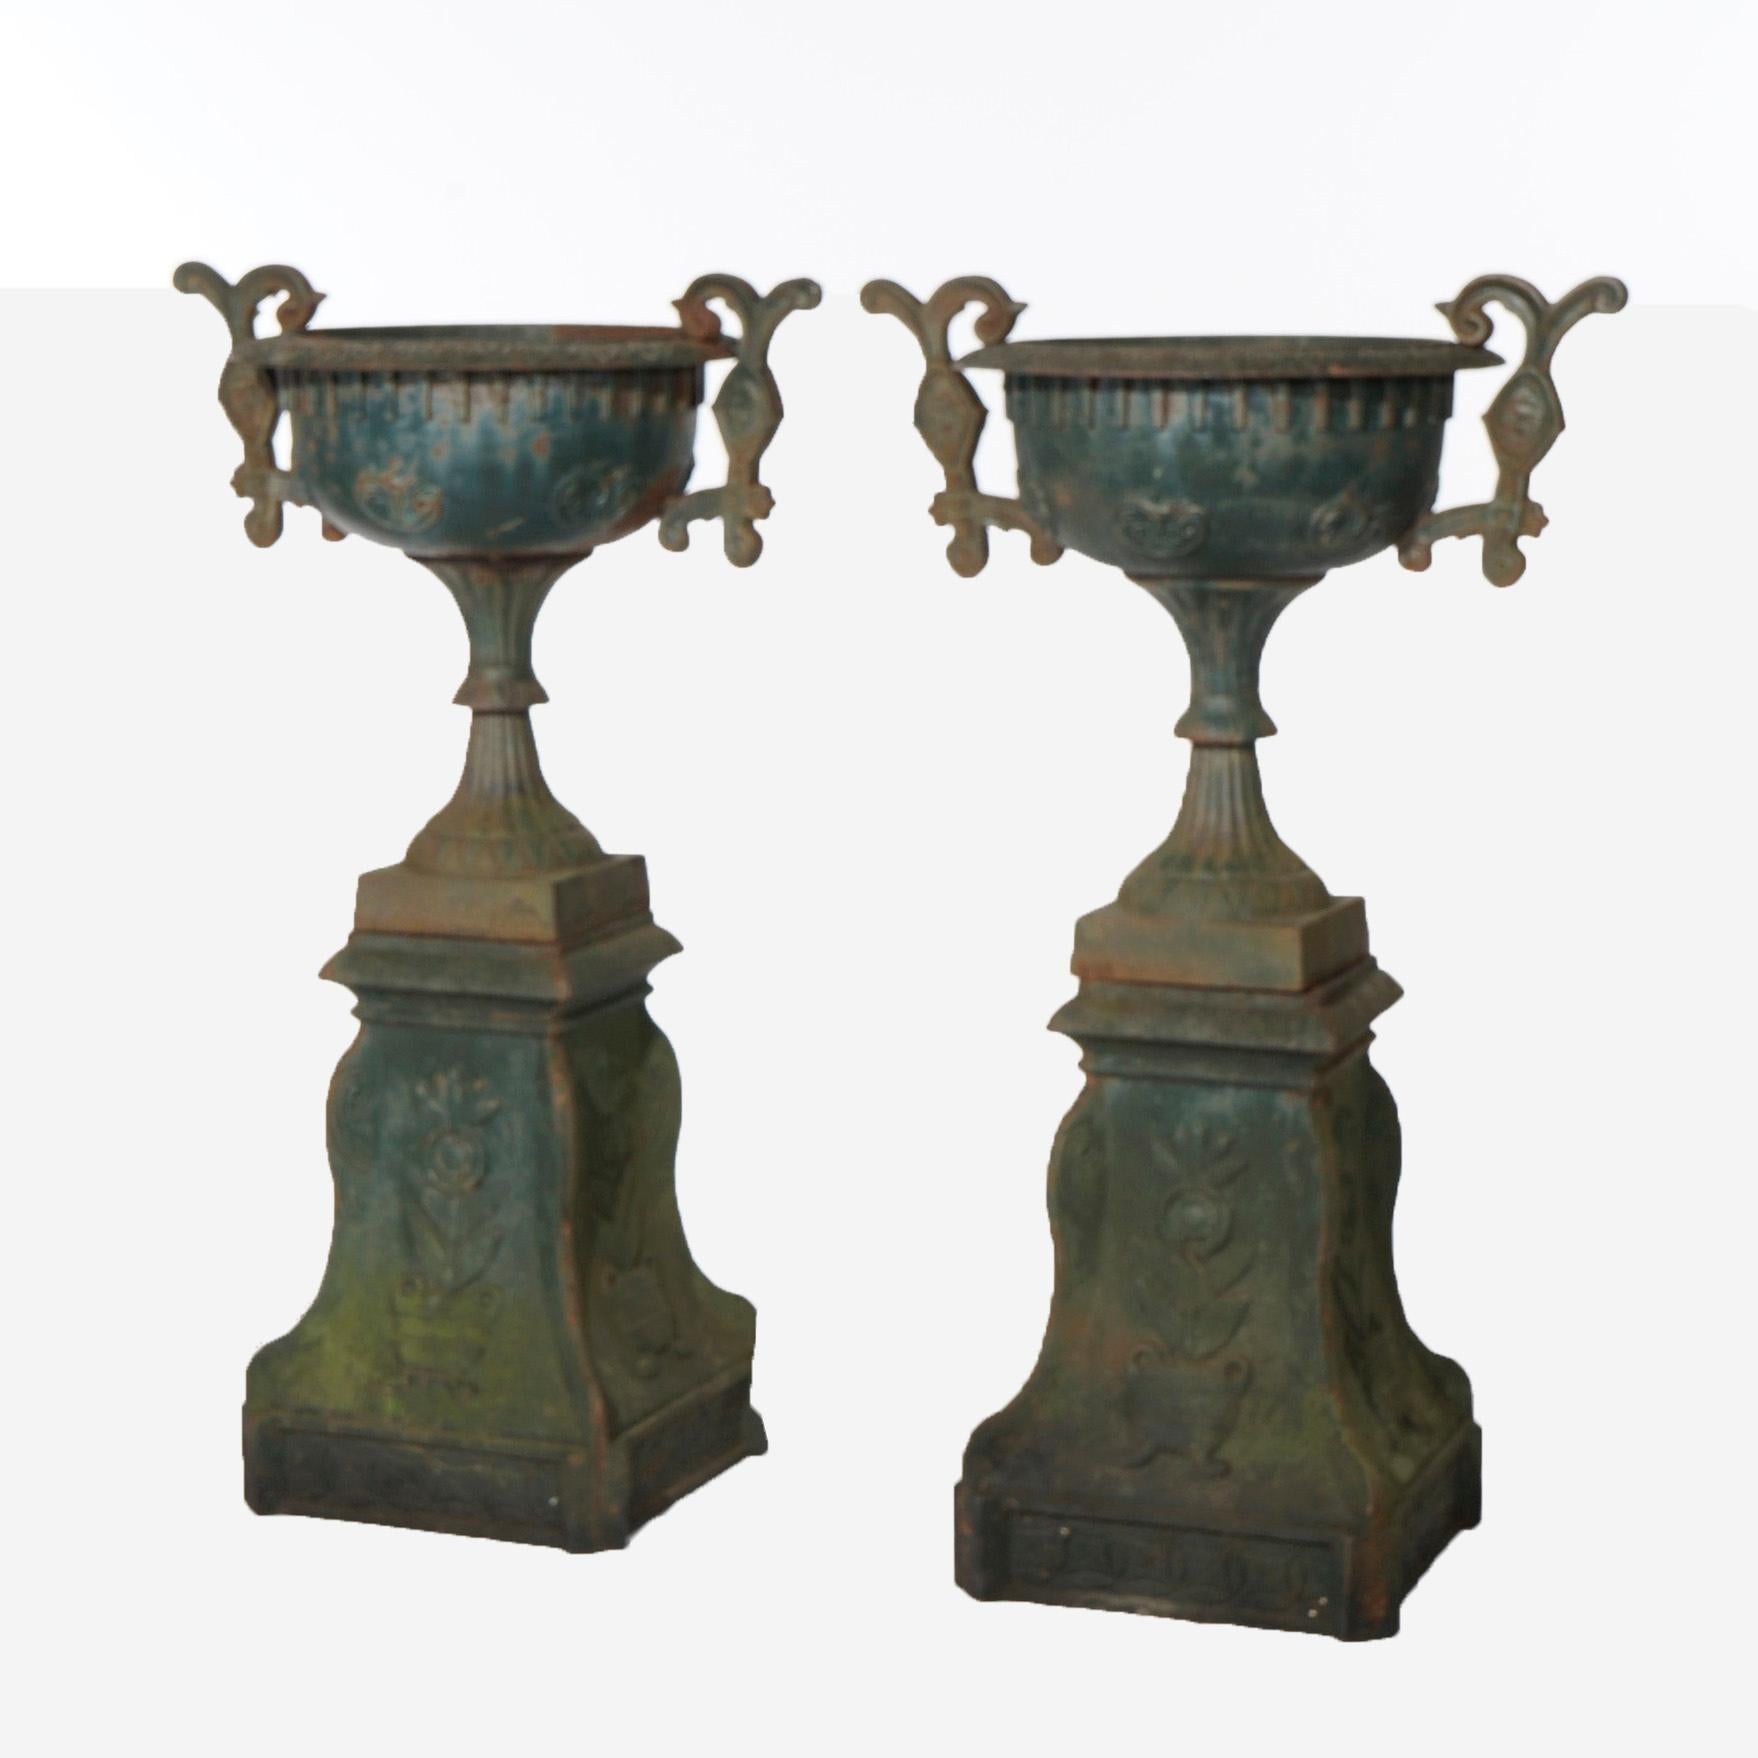 Classical Greek Pair Cast Iron Handled Grecian Urns on Floral Embossed Plinths 20th C